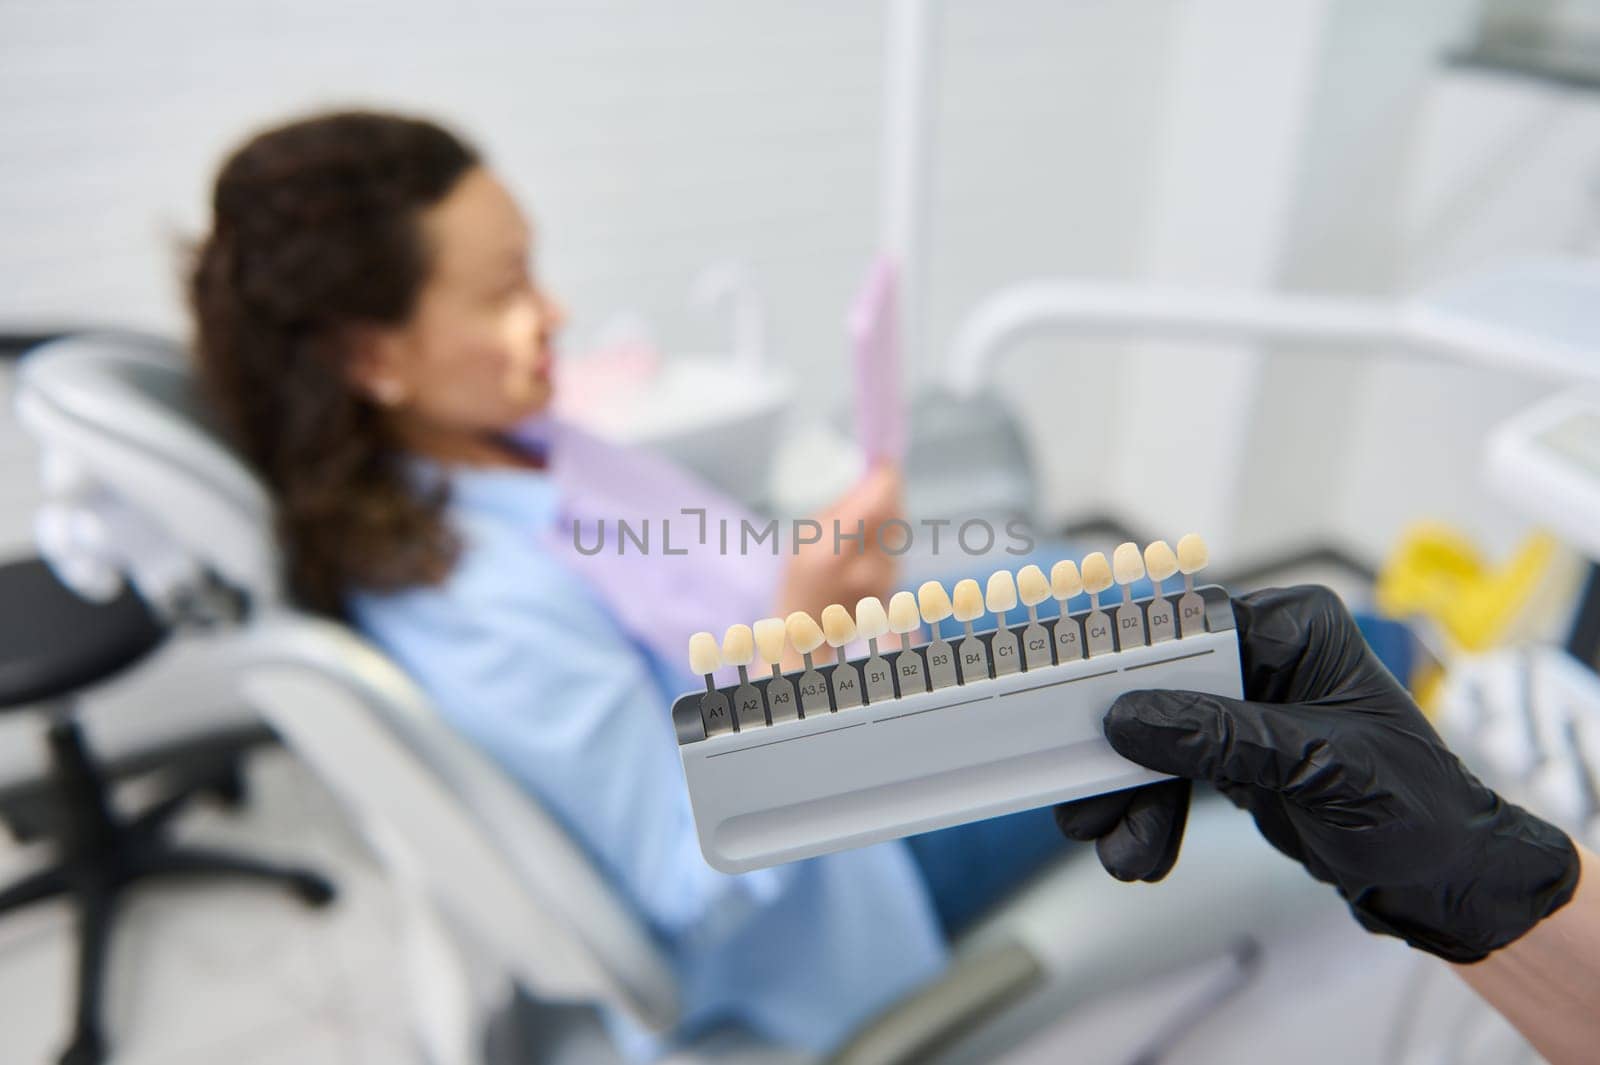 Vita scale. Bleaching teeth guide. Tooth color chart in the hands of a dentist orthodontist doctor, against blurred background of a female patient sitting in dental chair in modern dentistry clinic